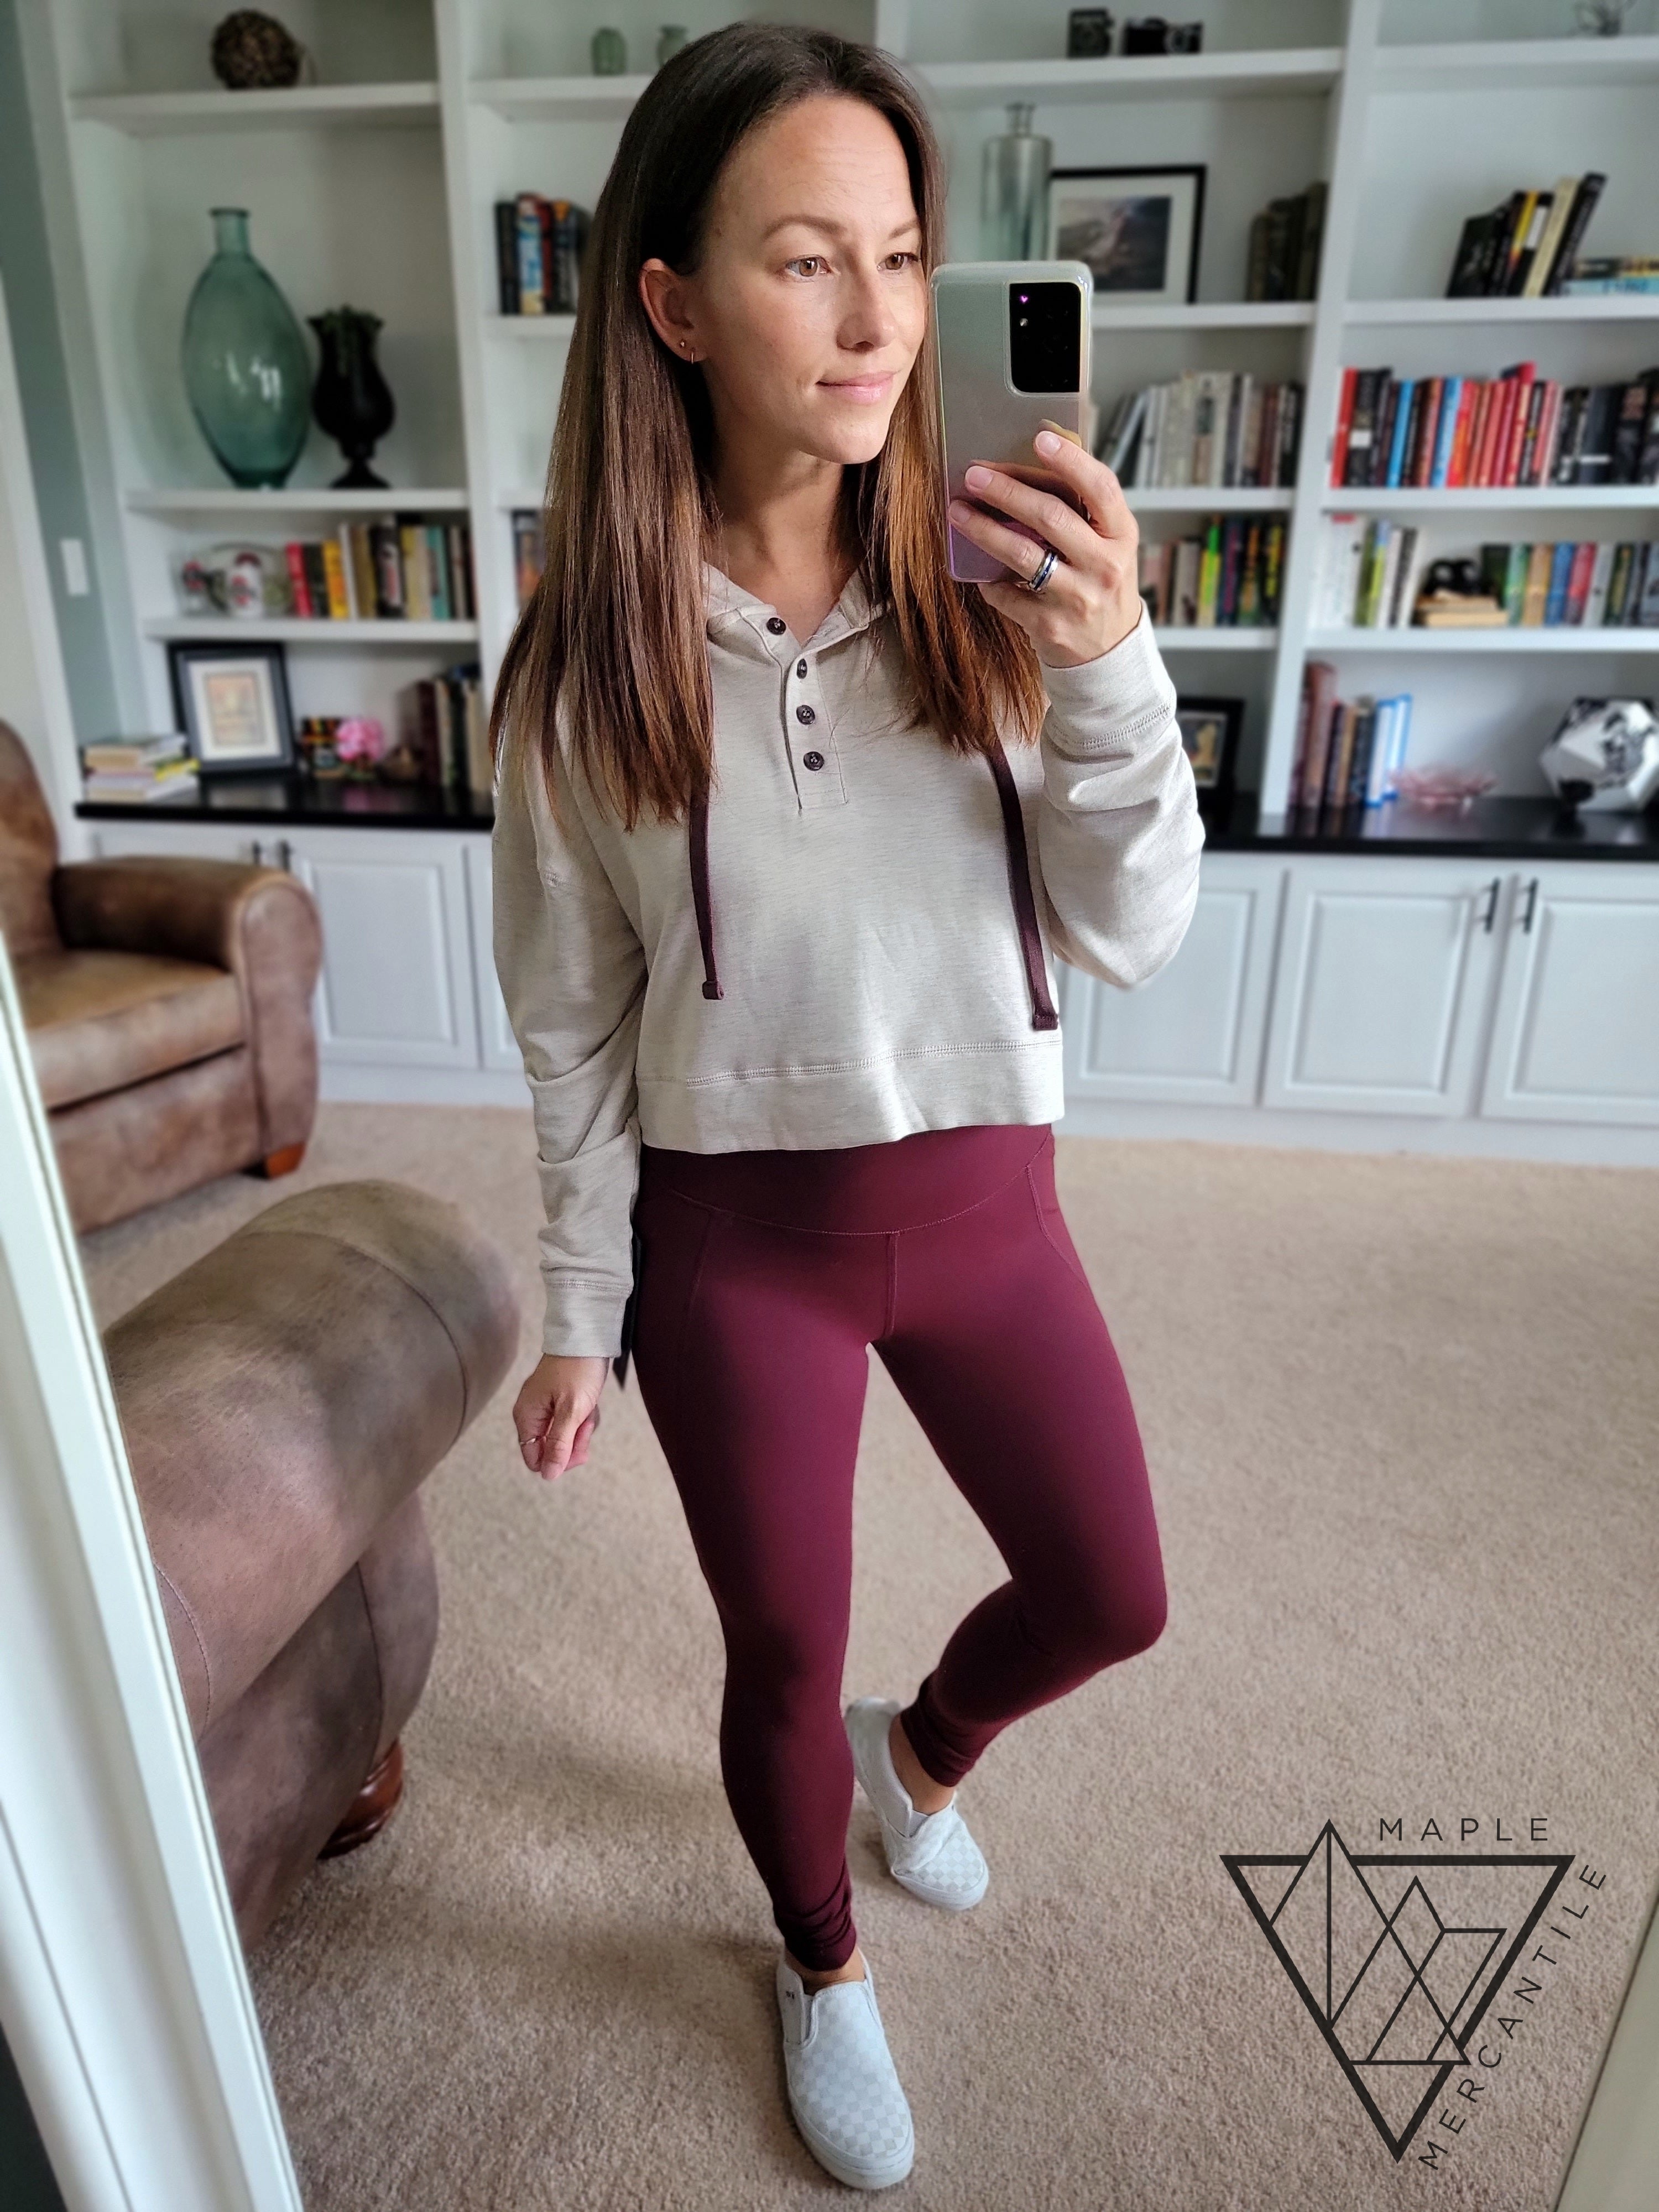 My New Obsession With Athleta: A Petite Try-On - The Mom Edit